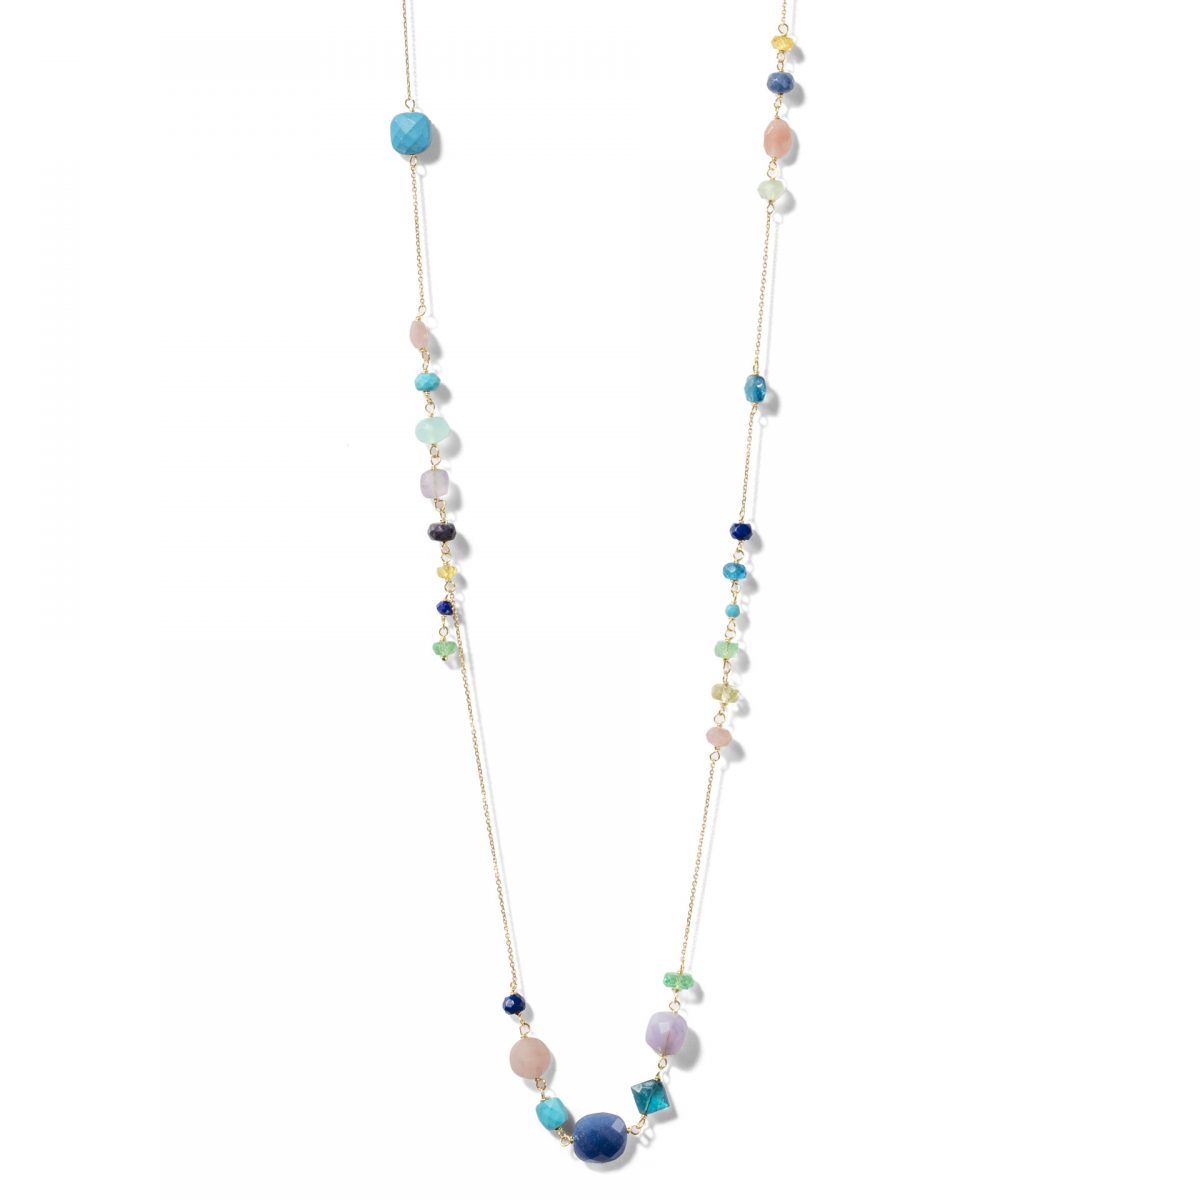 swp_necklace_6_232